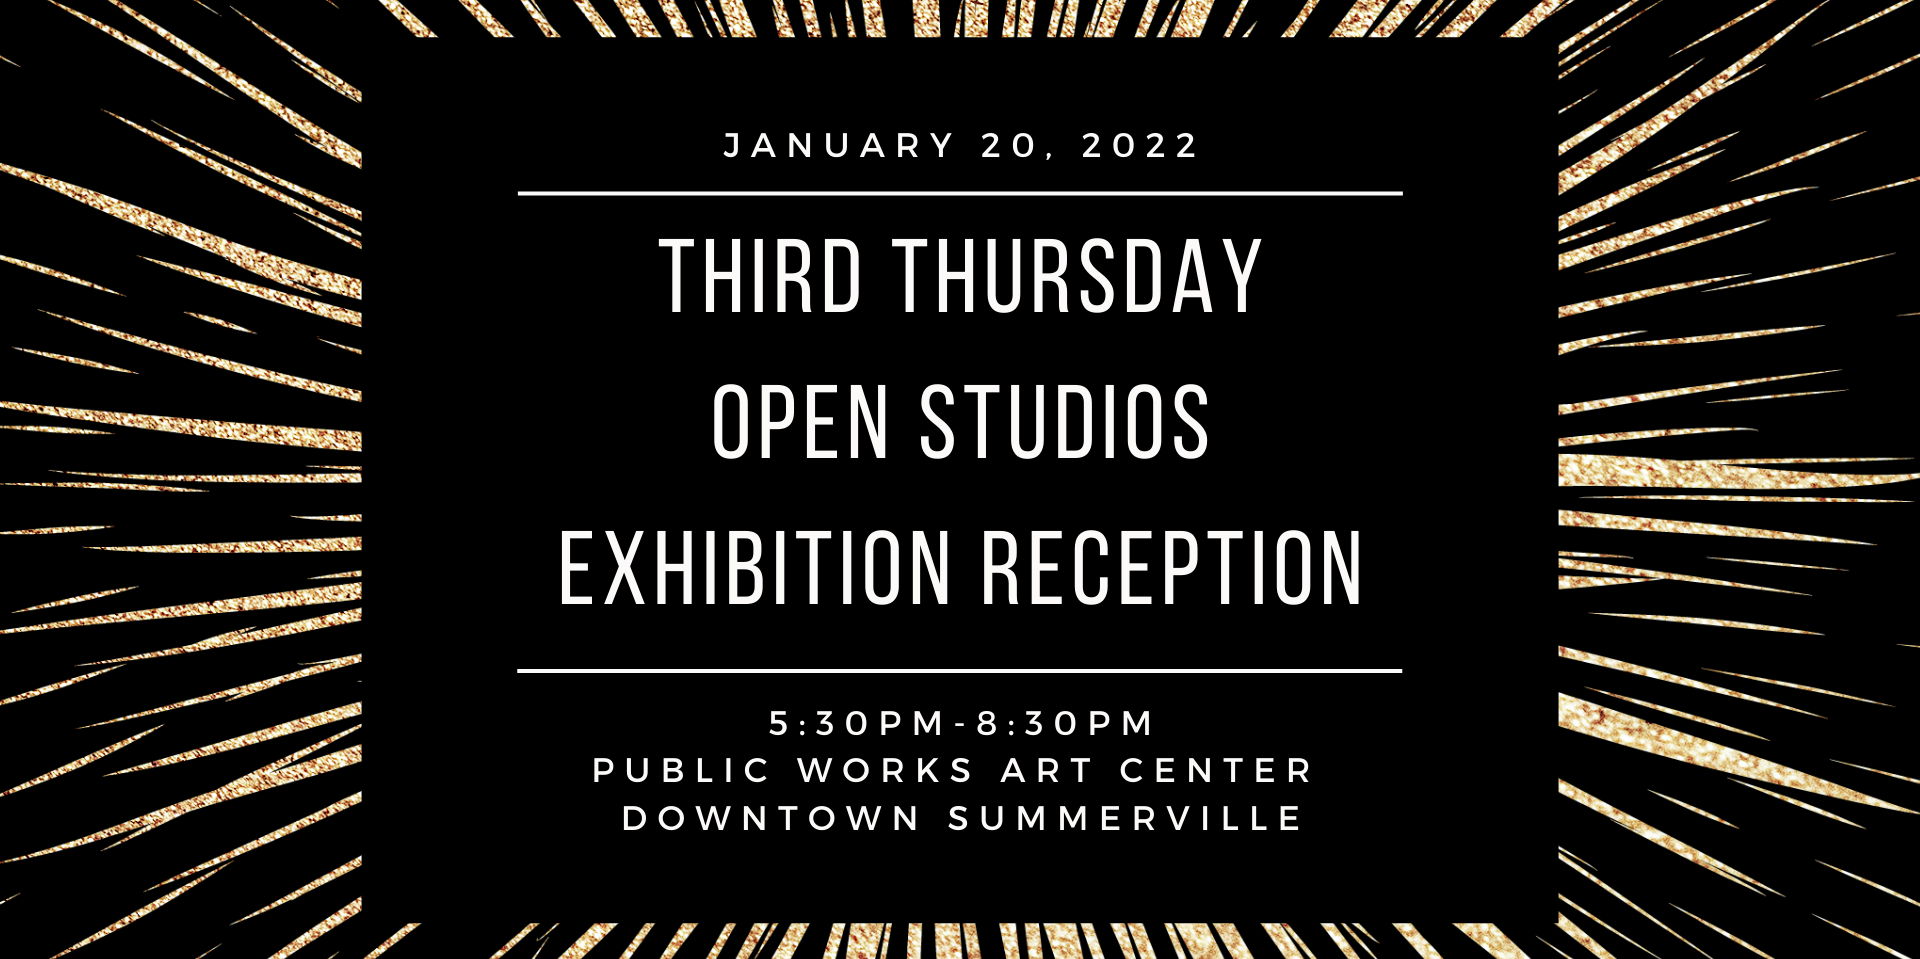 Open Studios and Opening Reception for Two Exhibits at Public Works Art Center promotional image